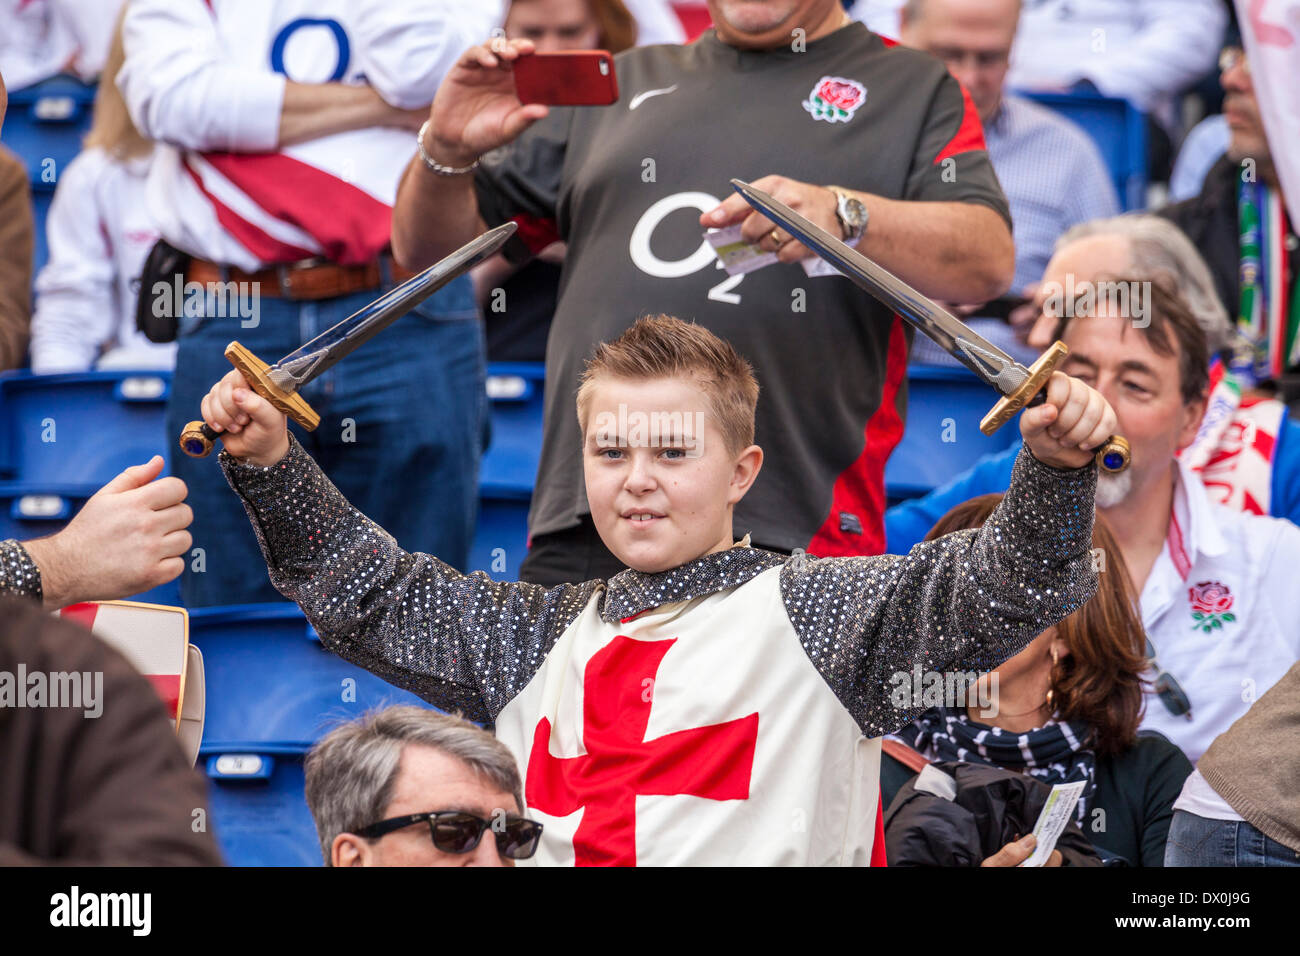 Young England rugby fan with a knight templar outfit brandishing two swords. Italy v England. RBS 6 Nations rugby. , Rome, Italy, 3/15/14. England beat Italy by 52 points to 11 at the Stadio Olimpico. Stock Photo